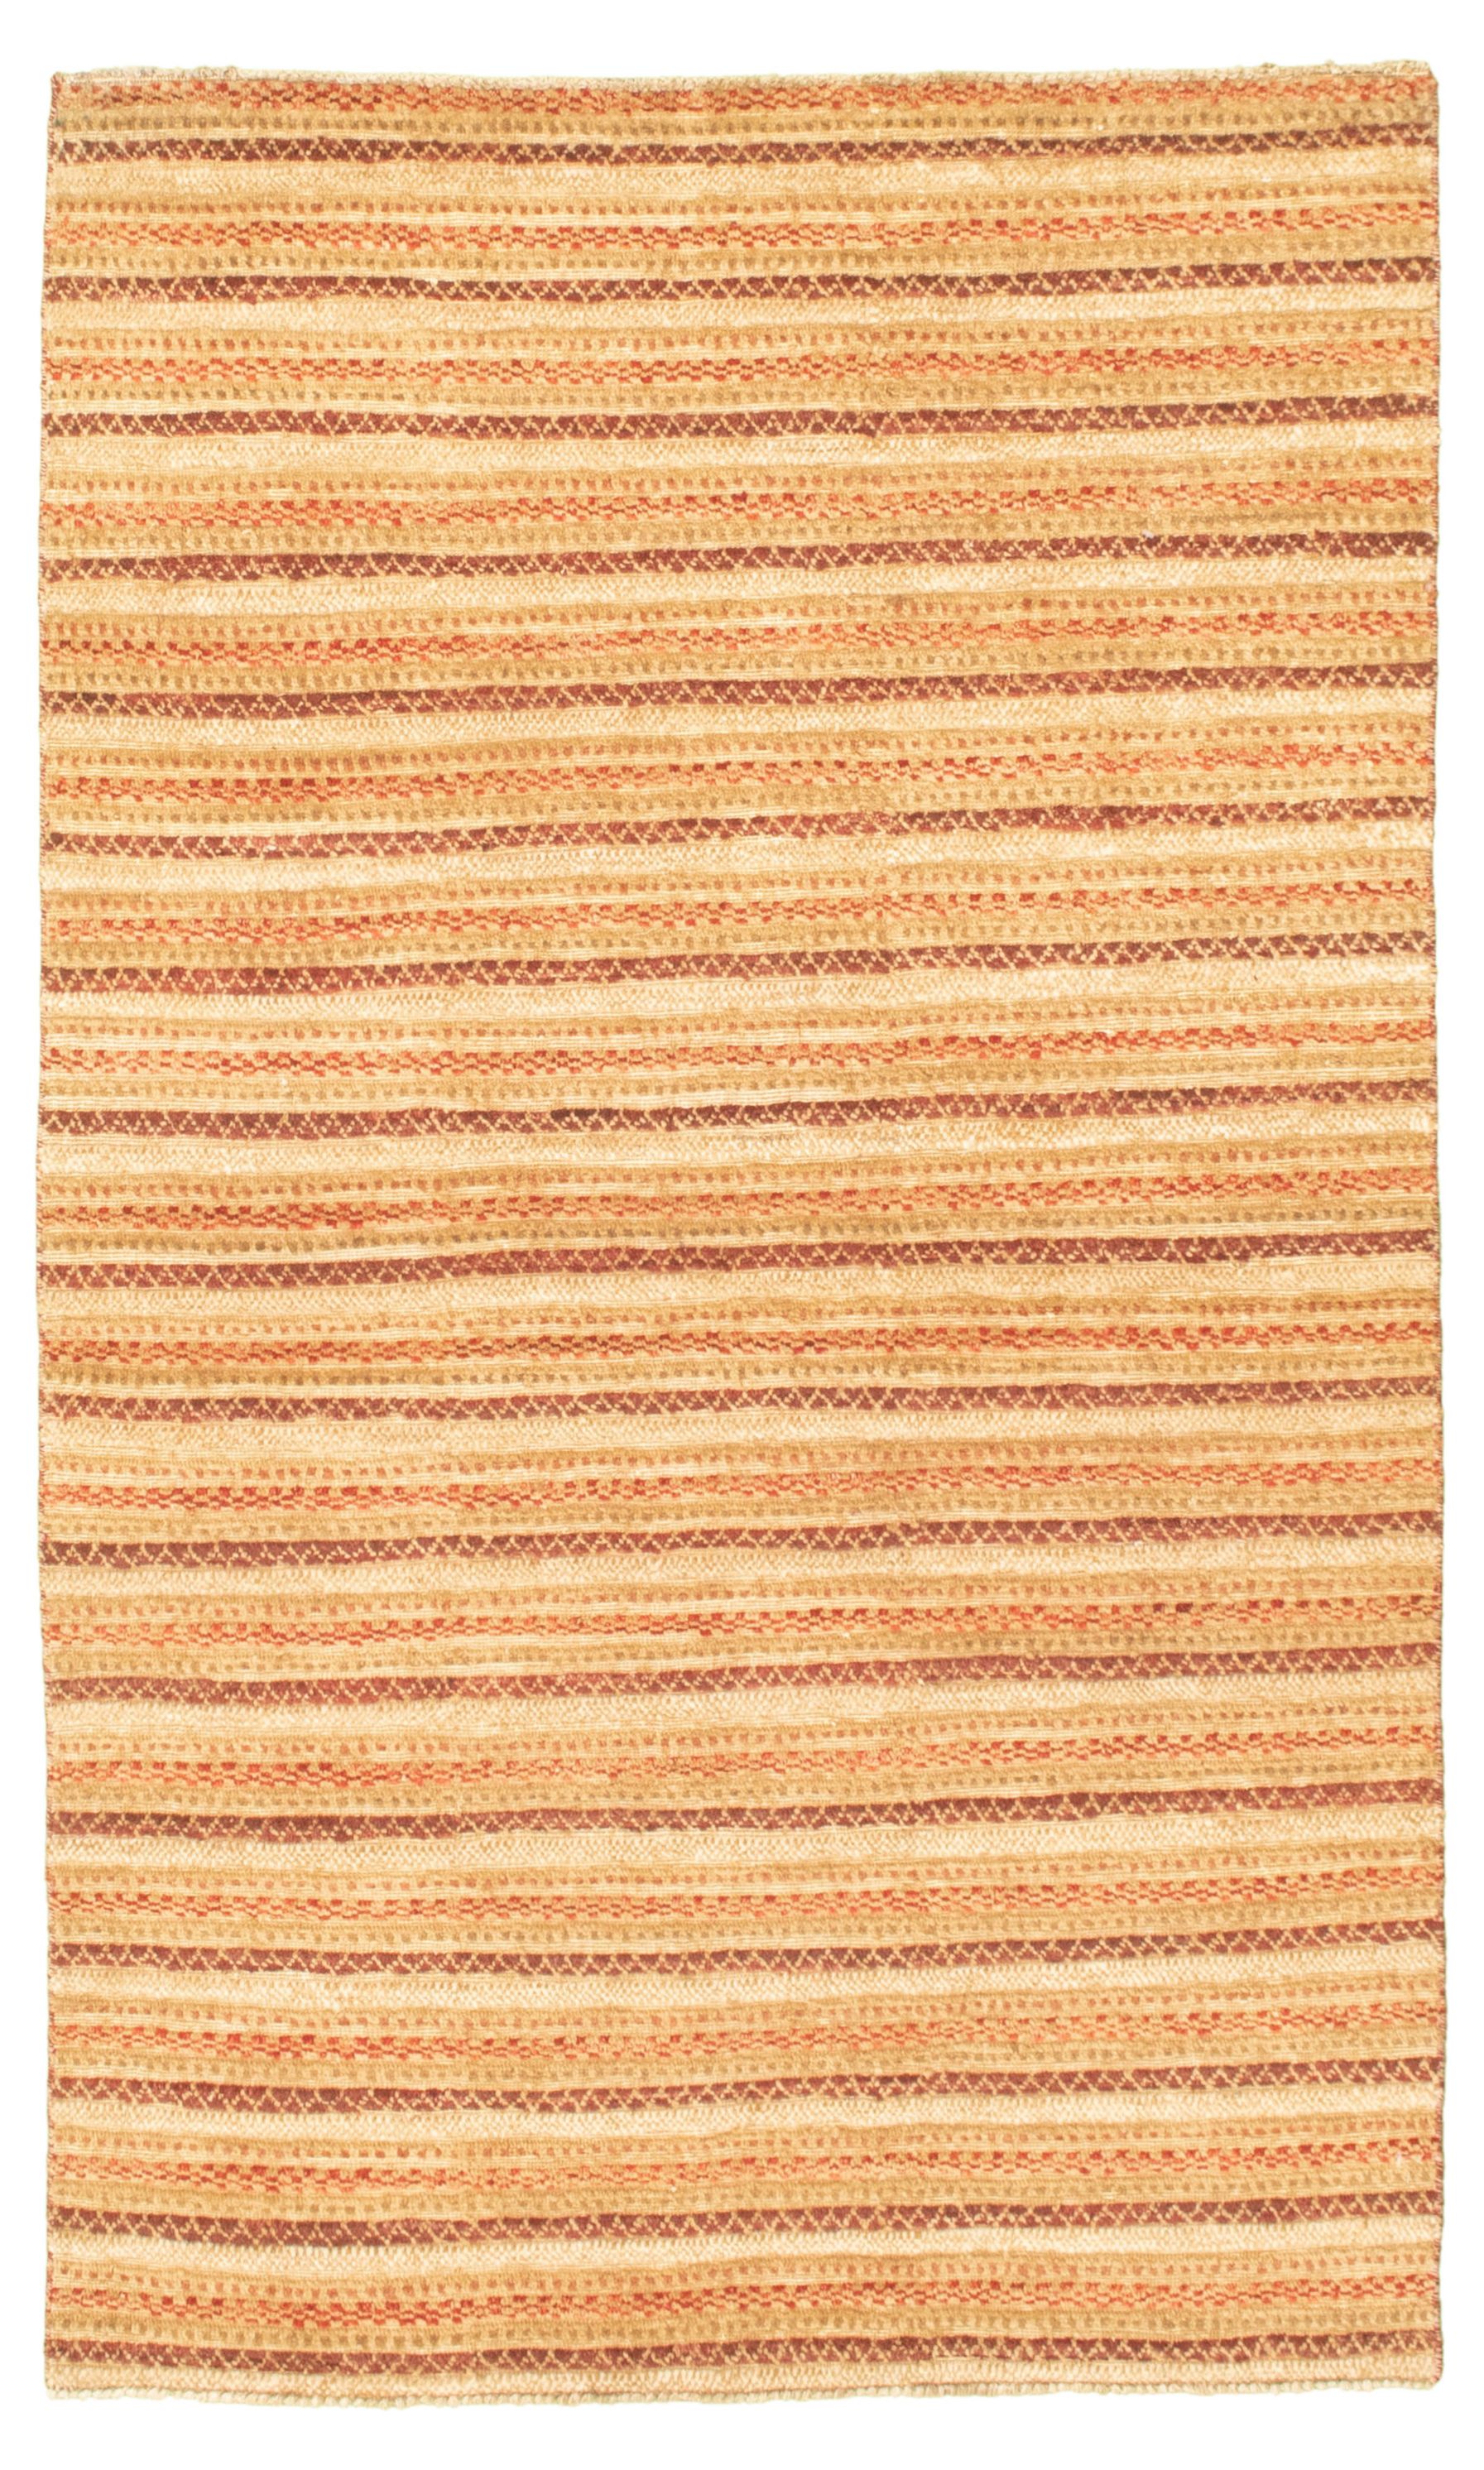 Hand-knotted Chobi Finest Cream, Light Red Wool Rug 3'10" x 6'4" Size: 3'10" x 6'4"  